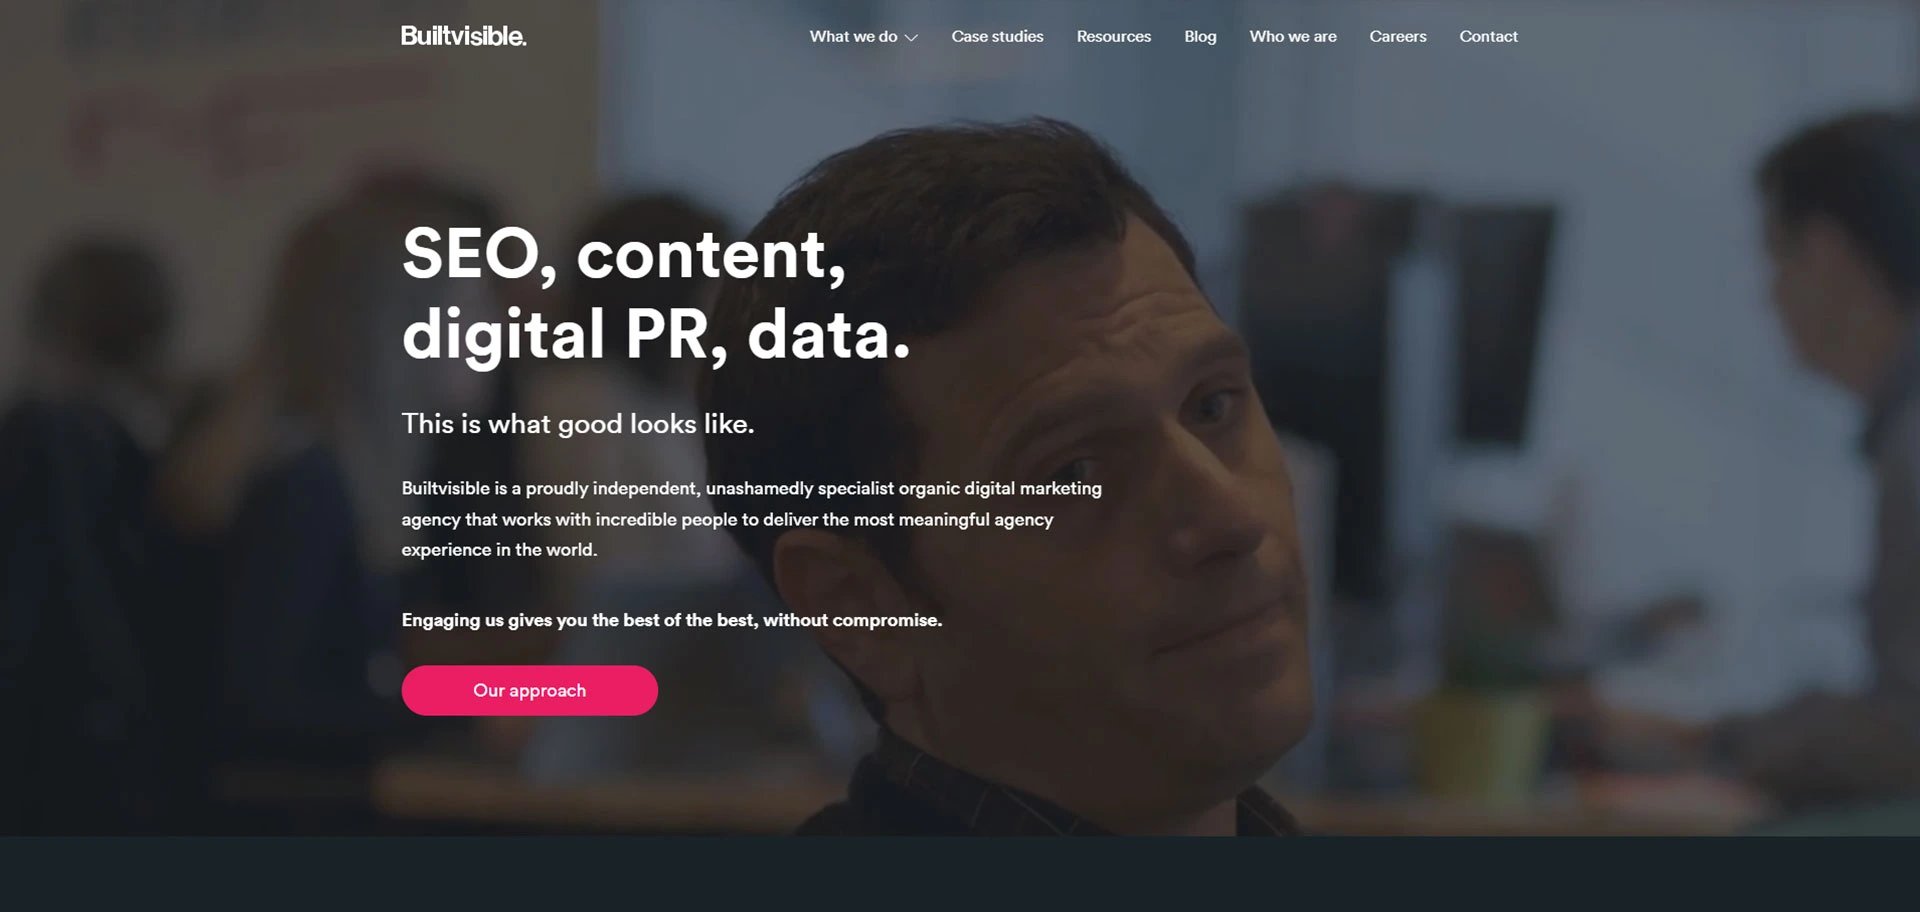 content marketing agency